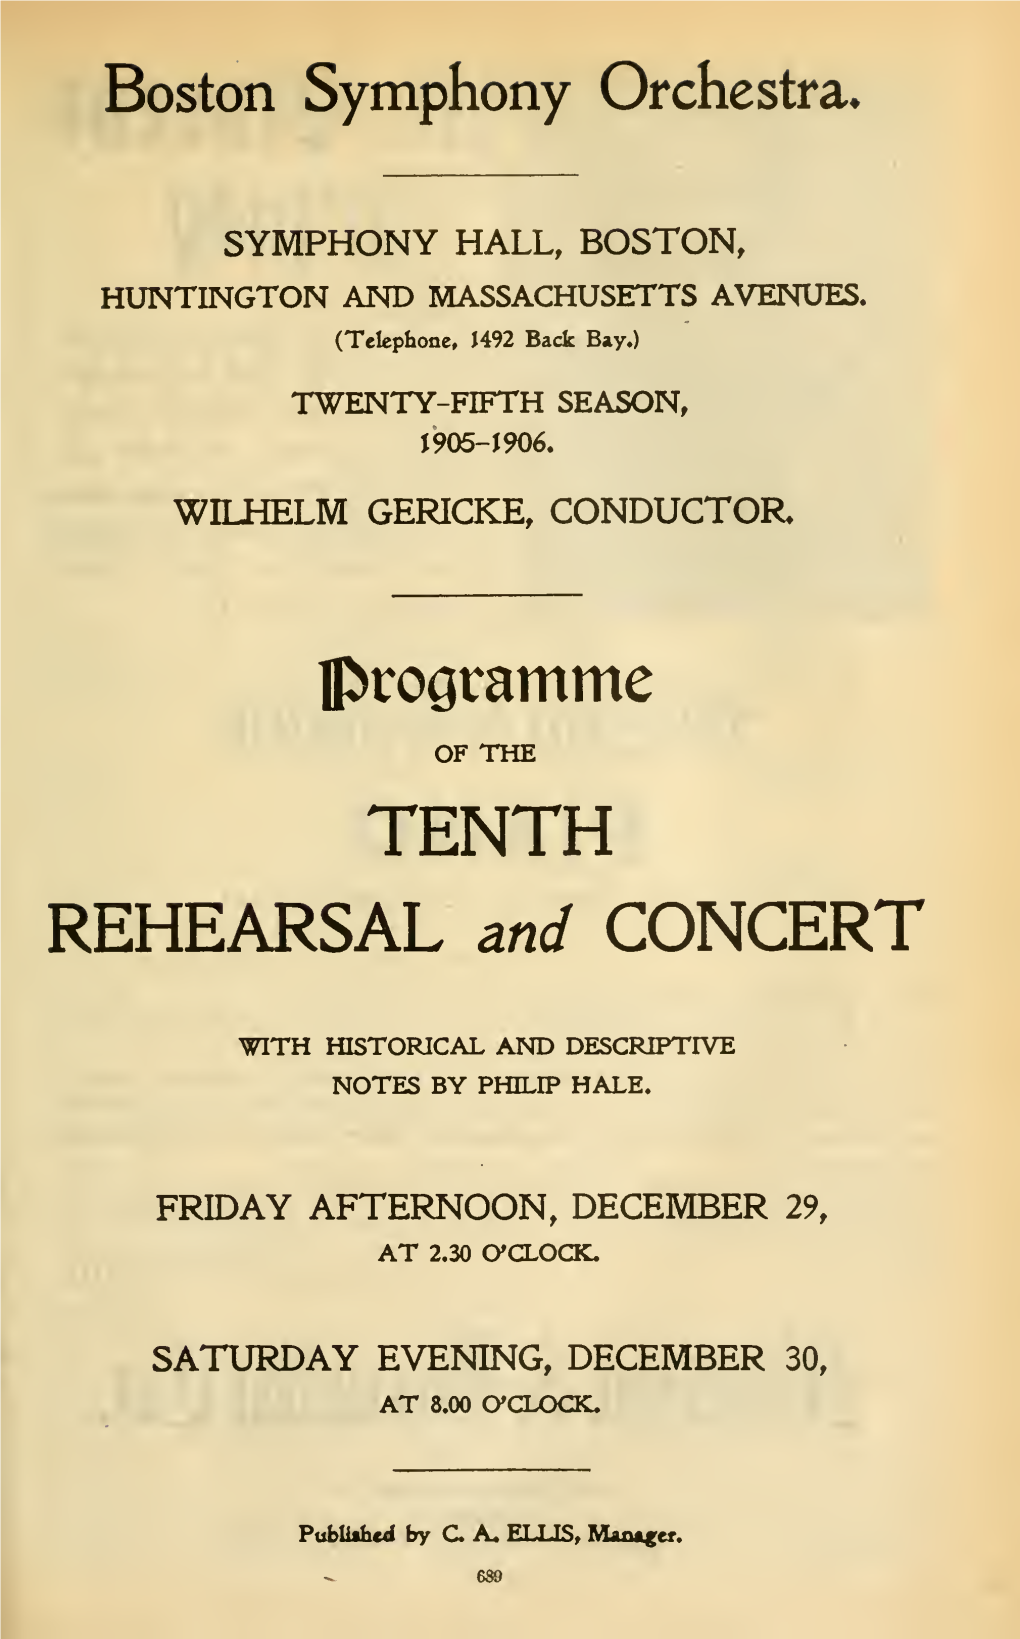 REHEARSAL and CONCERT